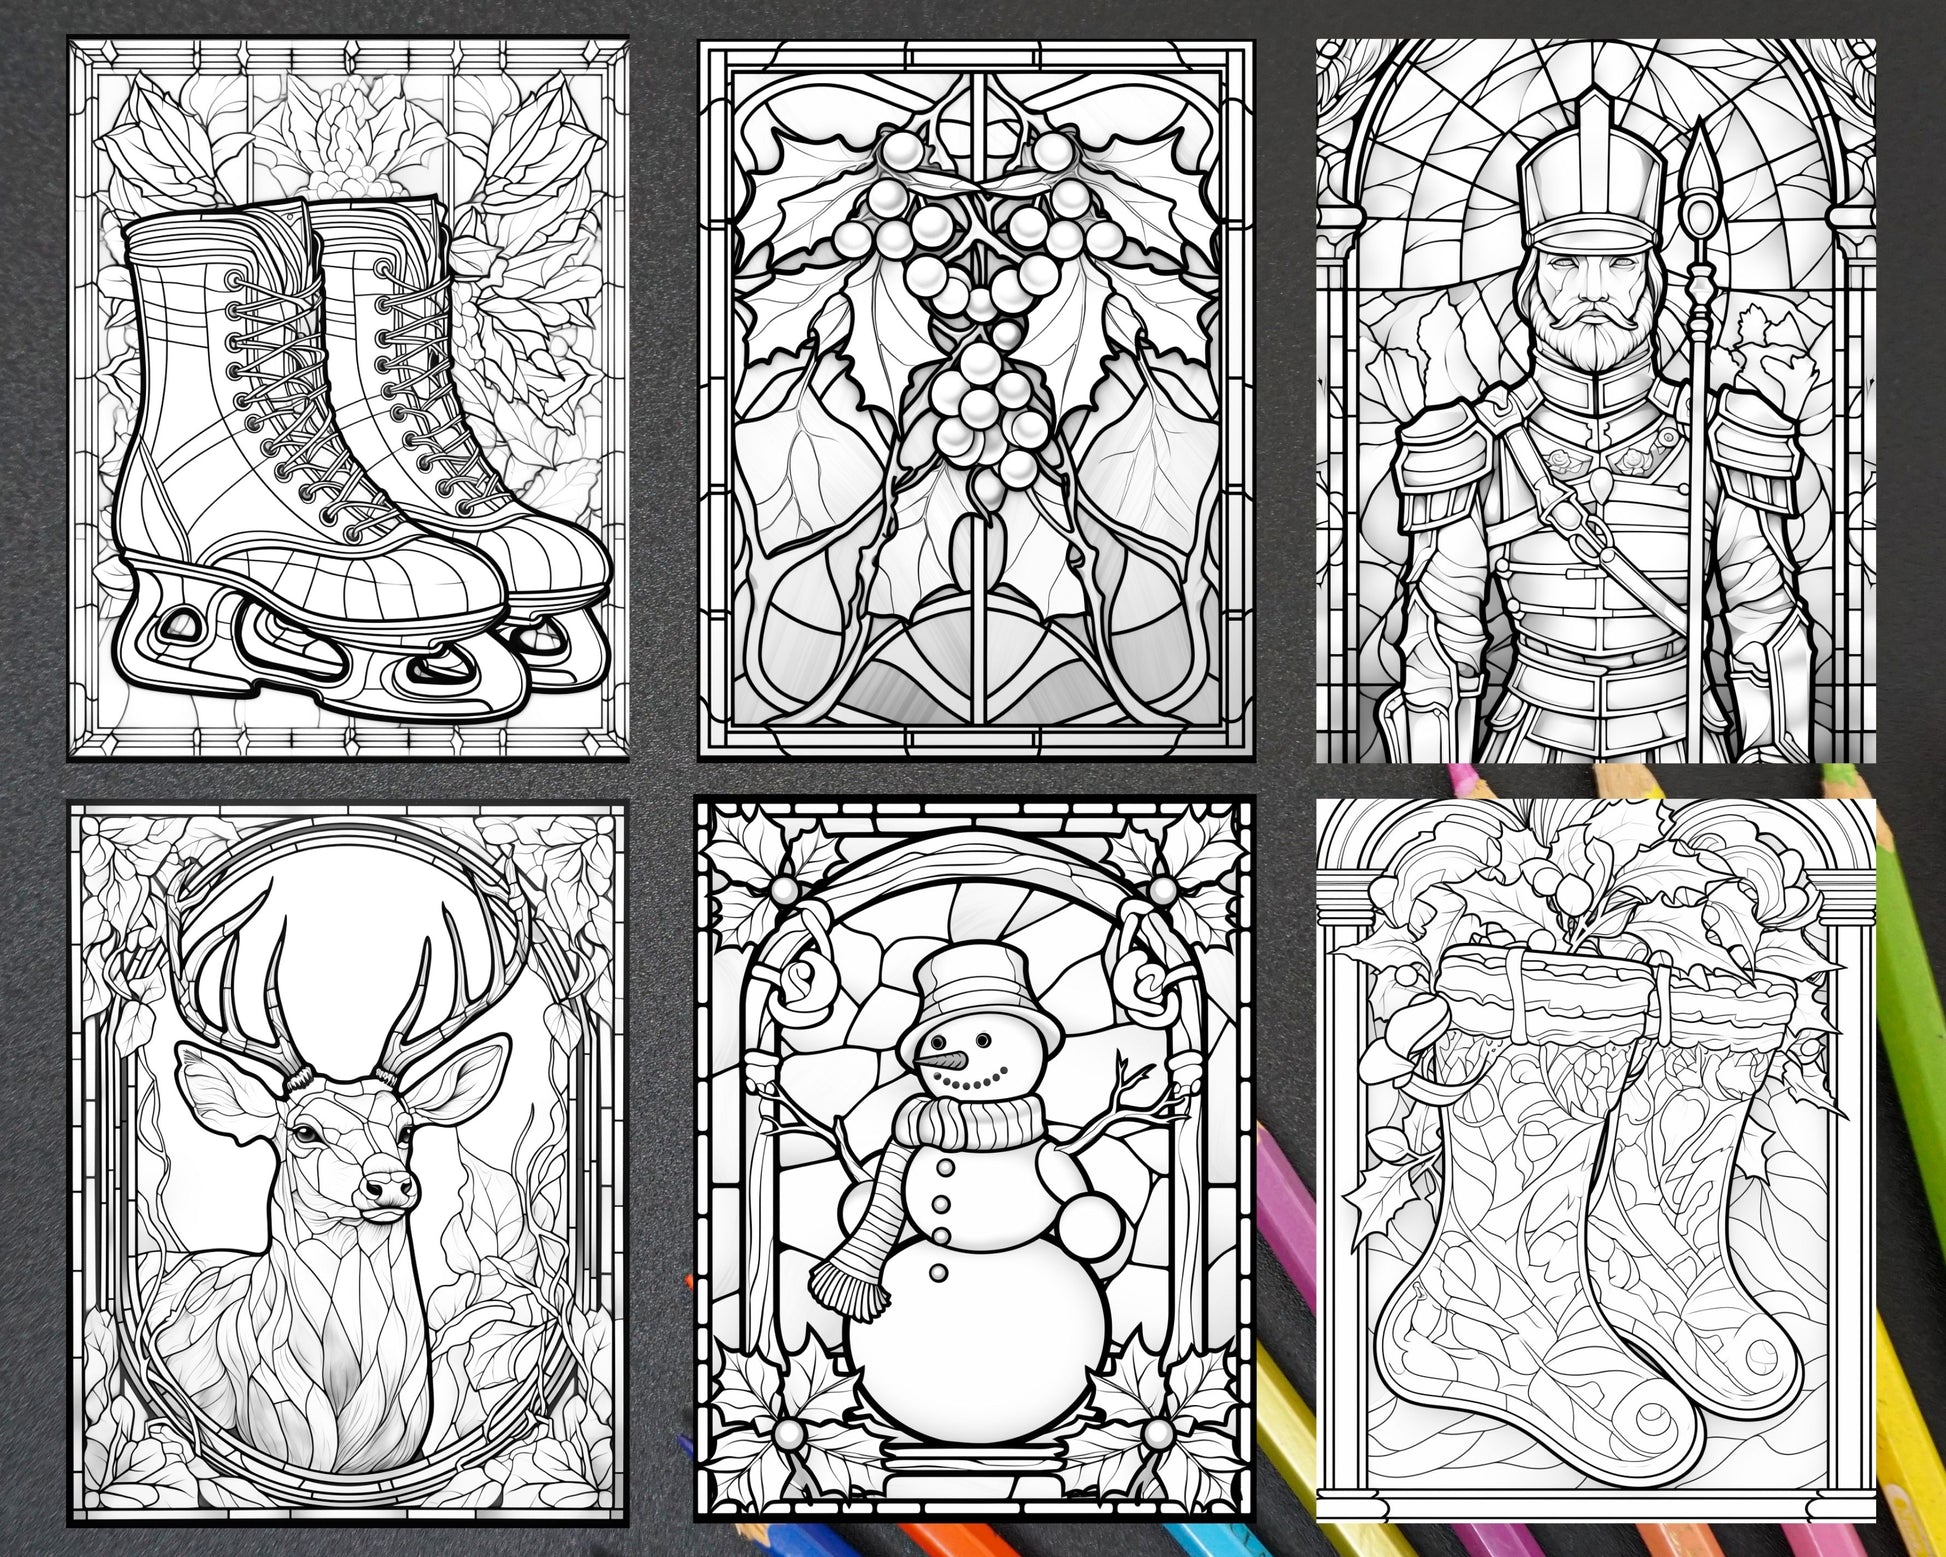 Christmas stained glass grayscale coloring pages for adults printa â coloring